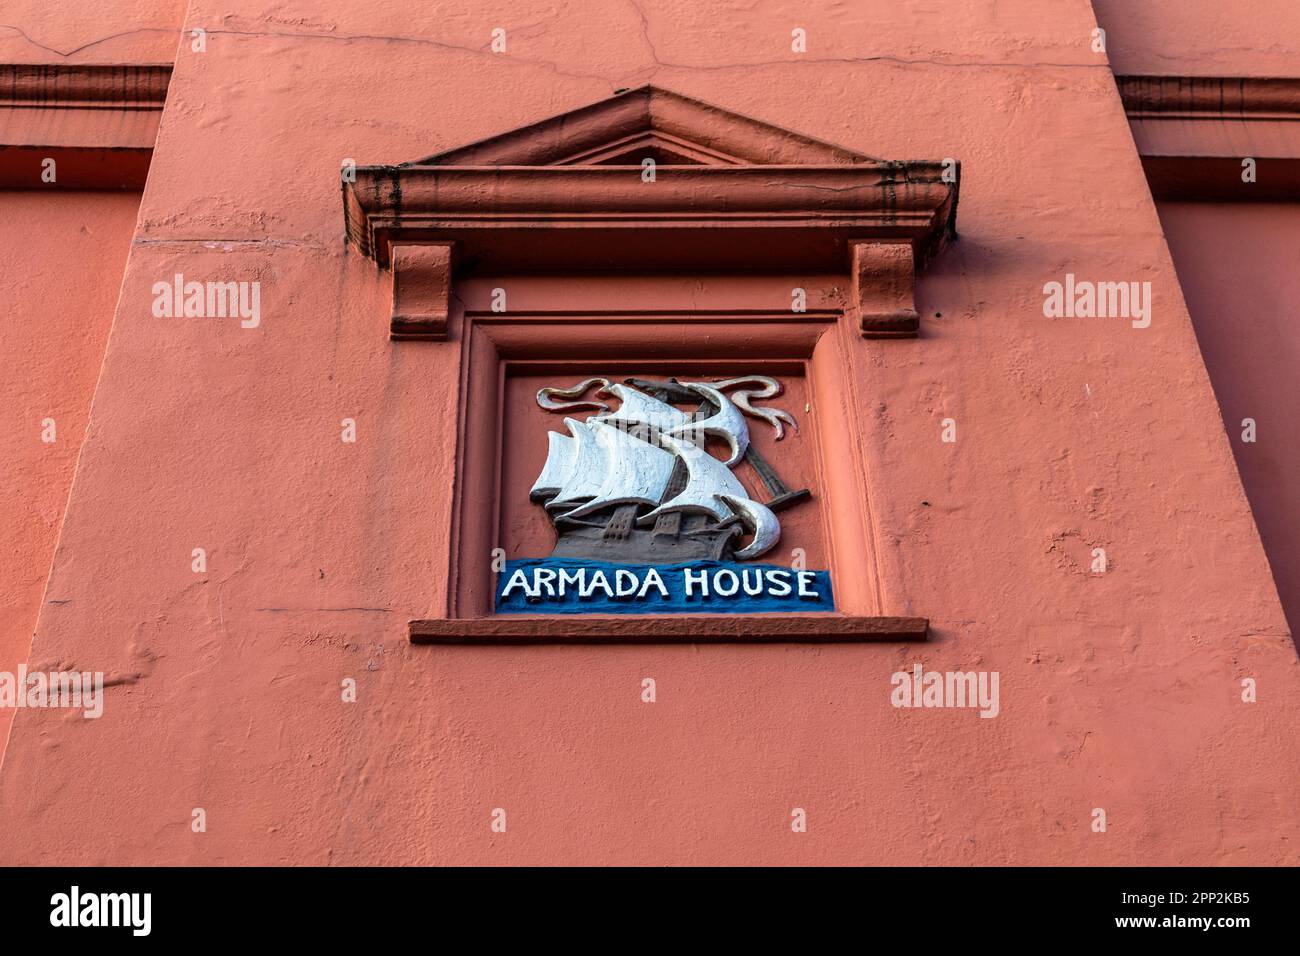 Plaster relief carving of a 16th-century ship on the facade of Armada House (Garsett House) featuring a Georgian doorway, Norwich, Norfolk, England, U Stock Photo